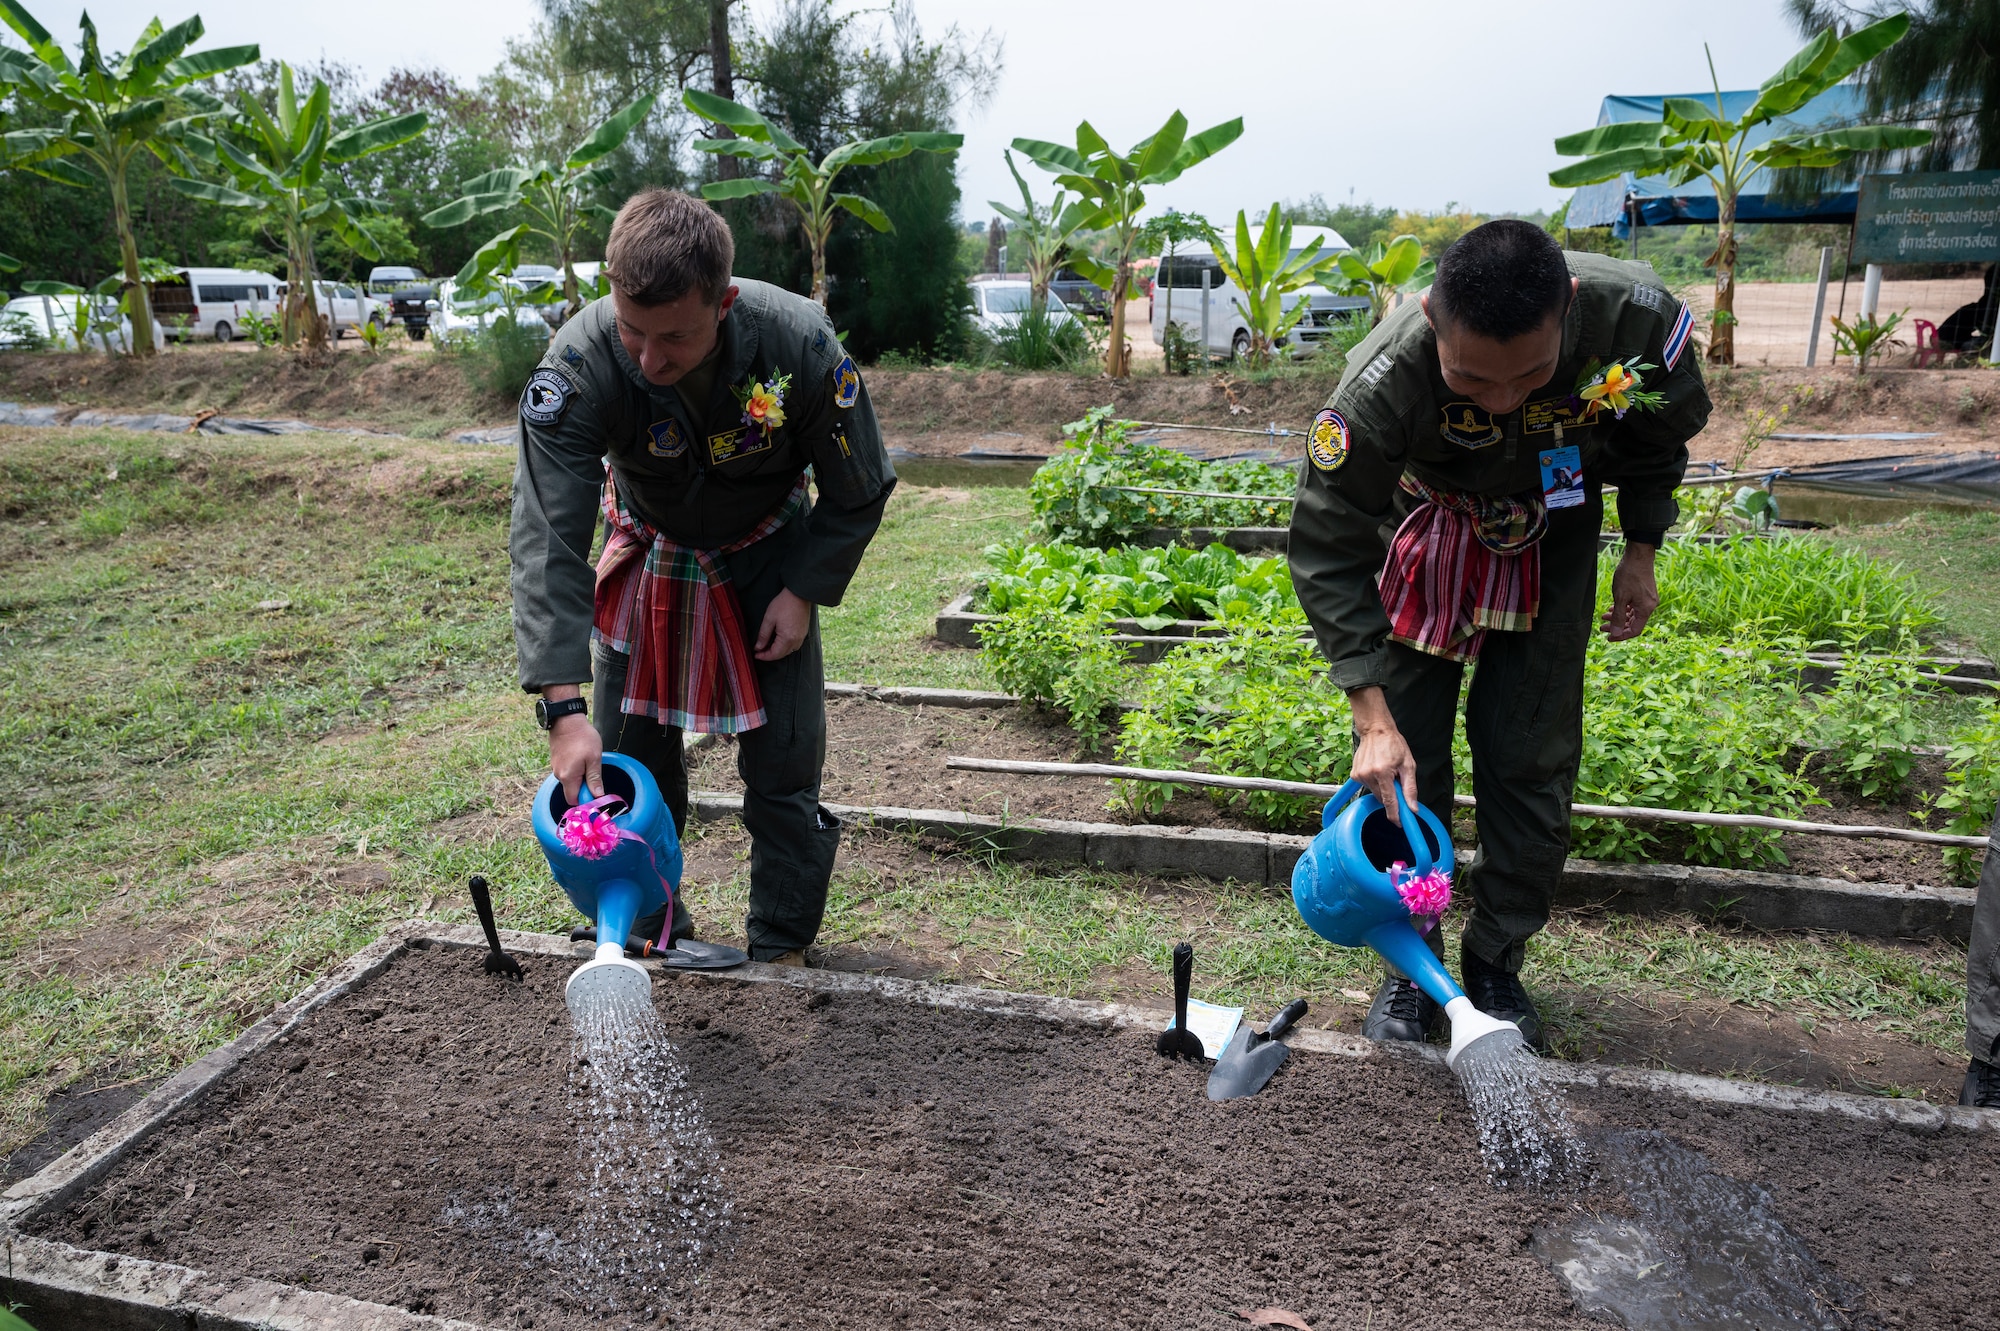 U.S. Air Force Col. Jeffrey Shulman, Cope Tiger 2024 exercise director, plants and waters seeds in the garden alongside his Royal Thai Air Force counterpart during a community outreach event for Cope Tiger 2024, Ban Krok Duan Ha School, Nakhon Ratchasima Province, Thailand, March 21, 2024. The exercise directors from the Royal Thai, Republic of Singapore and U.S. Air Force participated in a ribbon cutting ceremony for a new facility on the school campus, planted seeds in the garden, toured the school and served lunch to the students. (U.S. Air Force photo by Tech. Sgt. Hailey Haux)